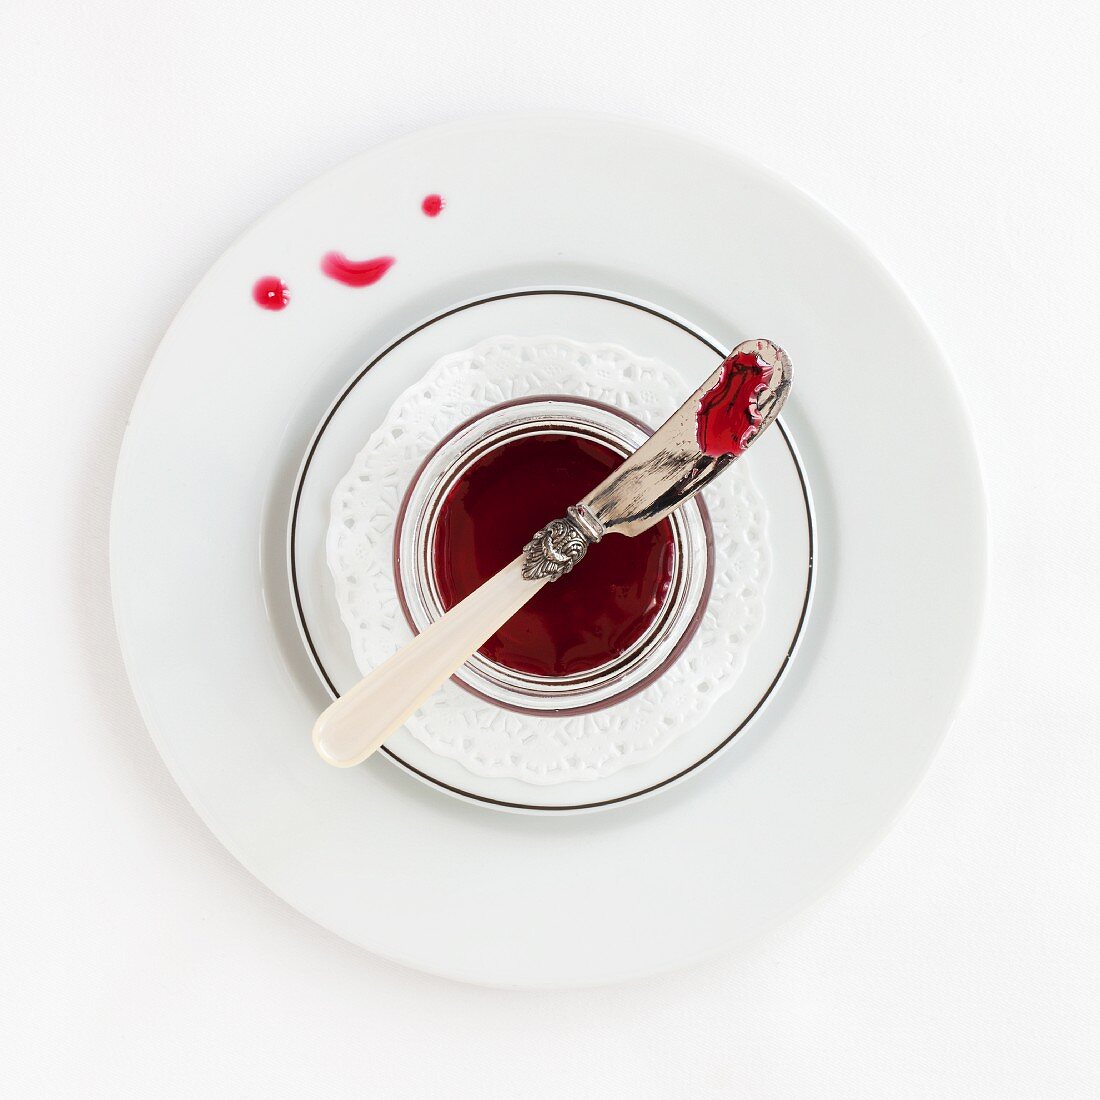 A dish of hibiscus syrup with a knife